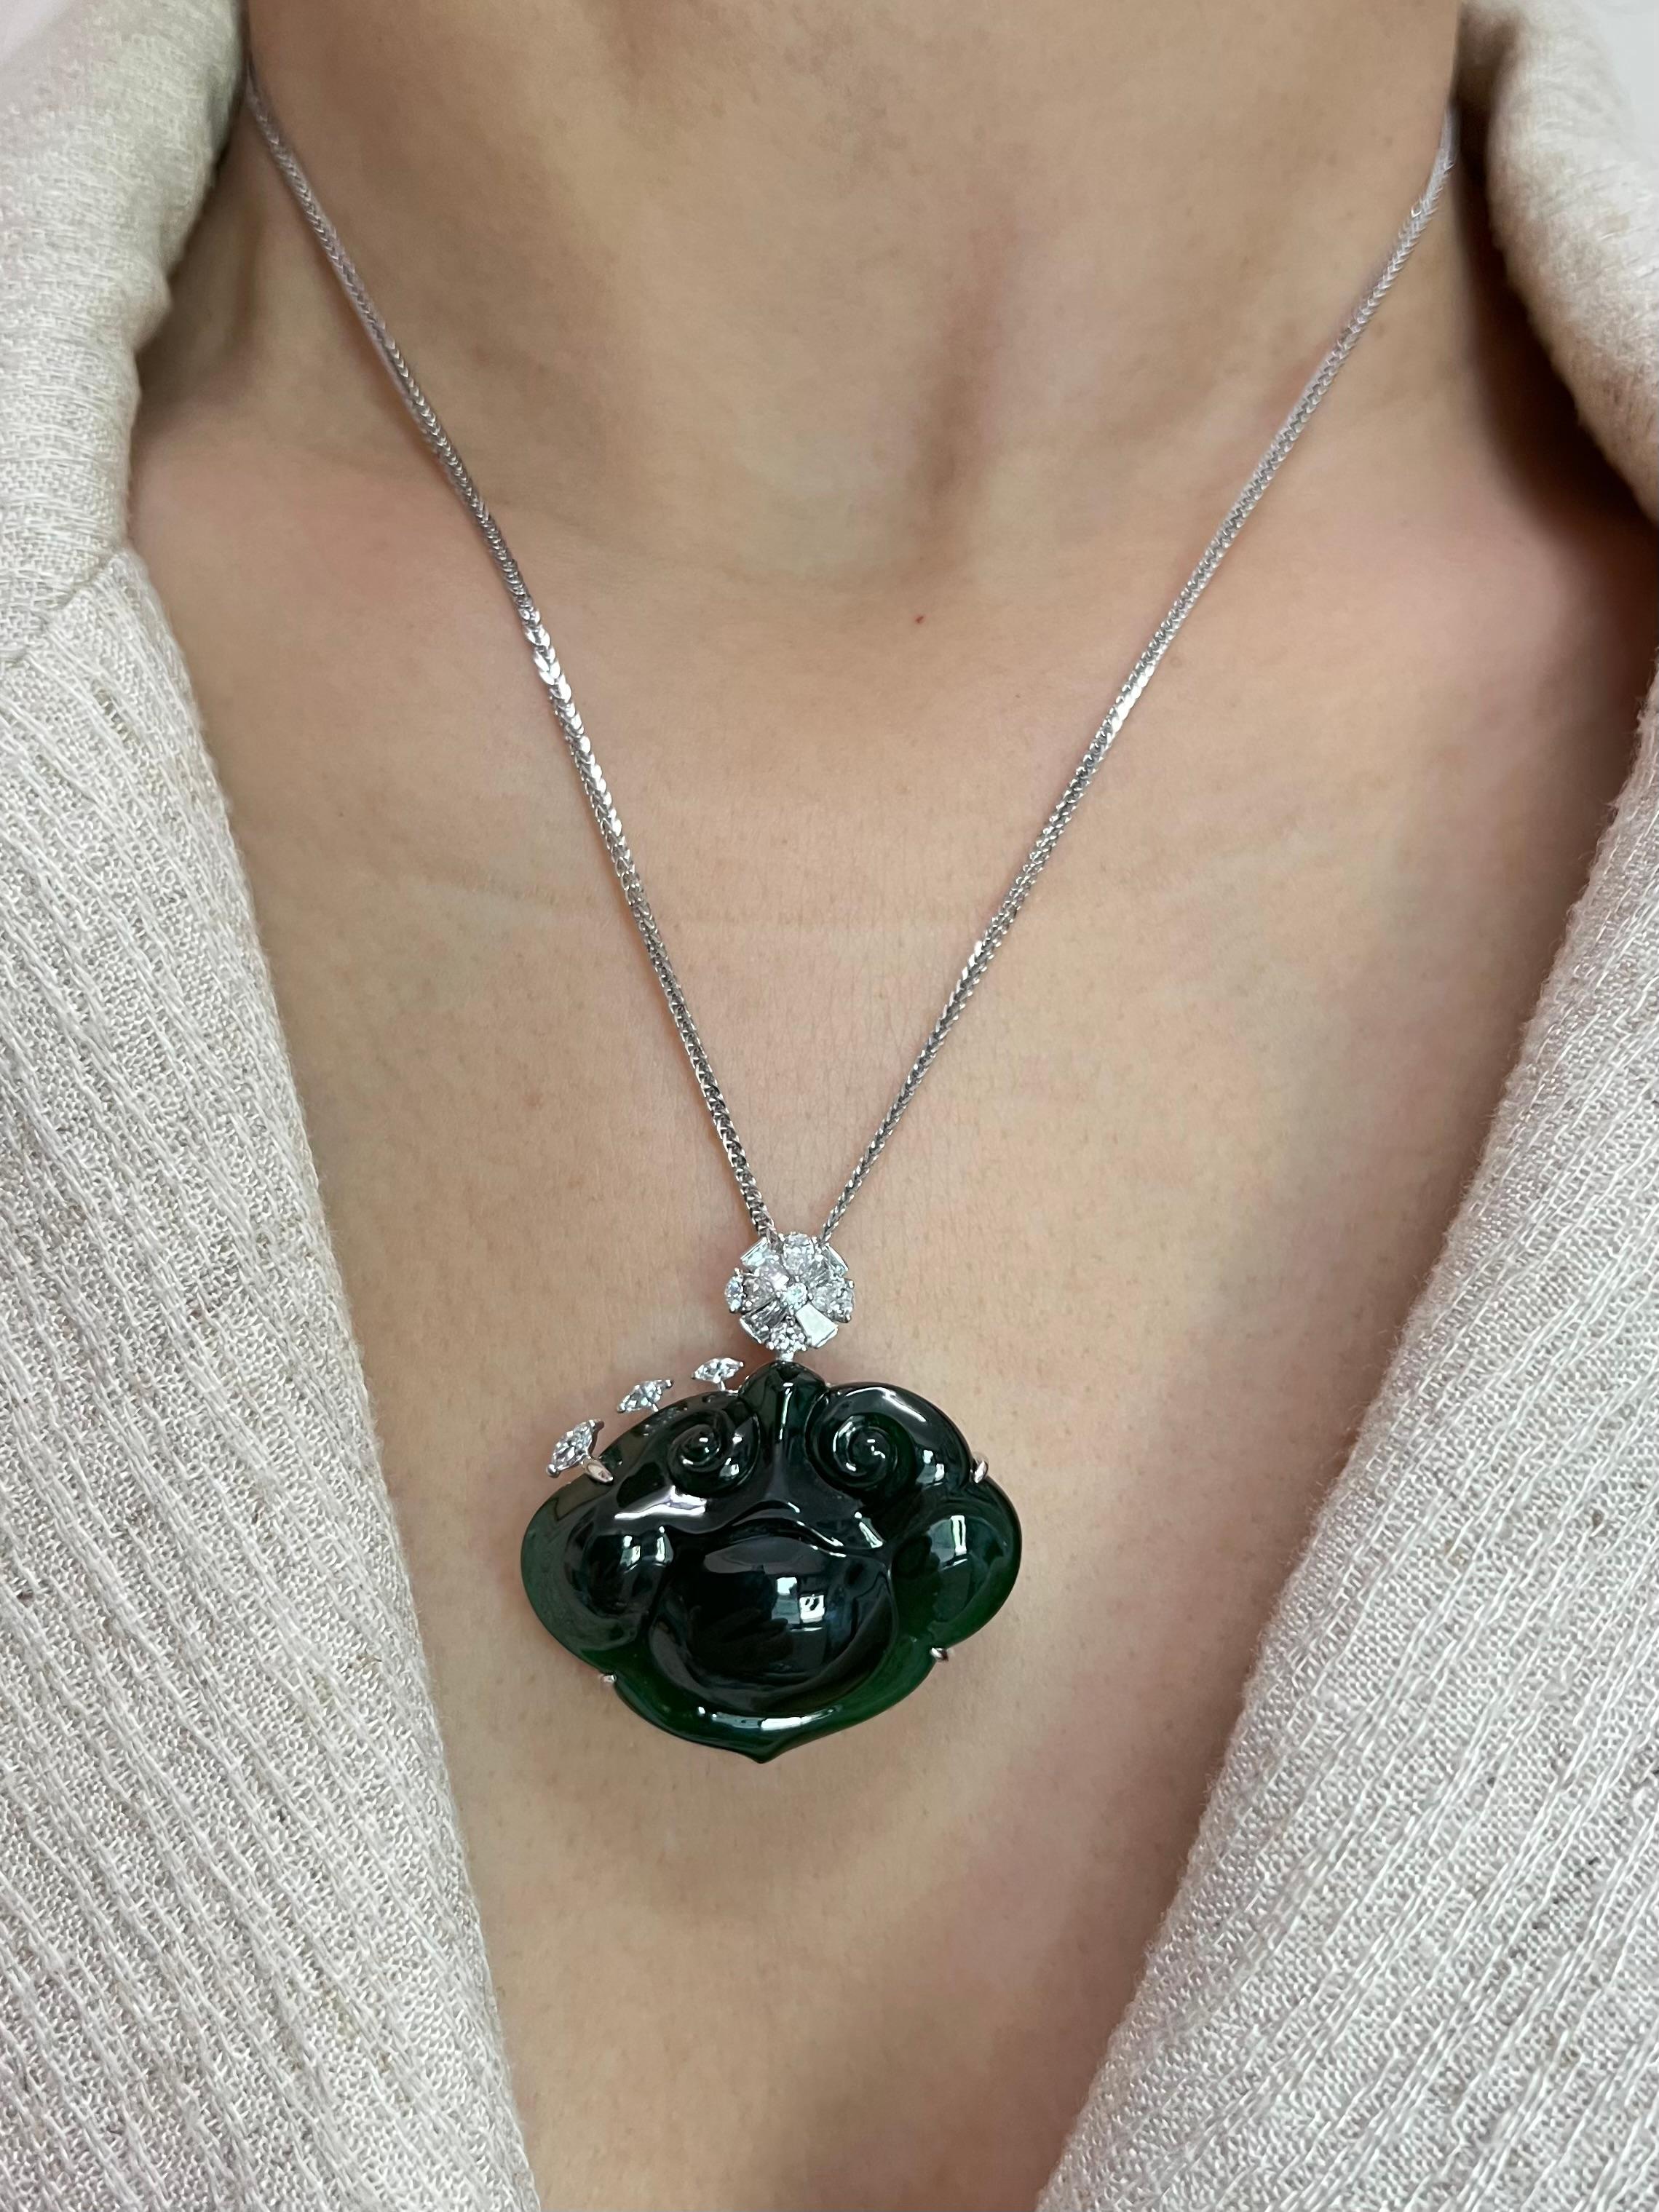 Please check out the HD video. Here is a substantial and natural intense green Jade and diamond pendant. The jade is certified by 2 different labs to be natural and without treatments. The carving of 